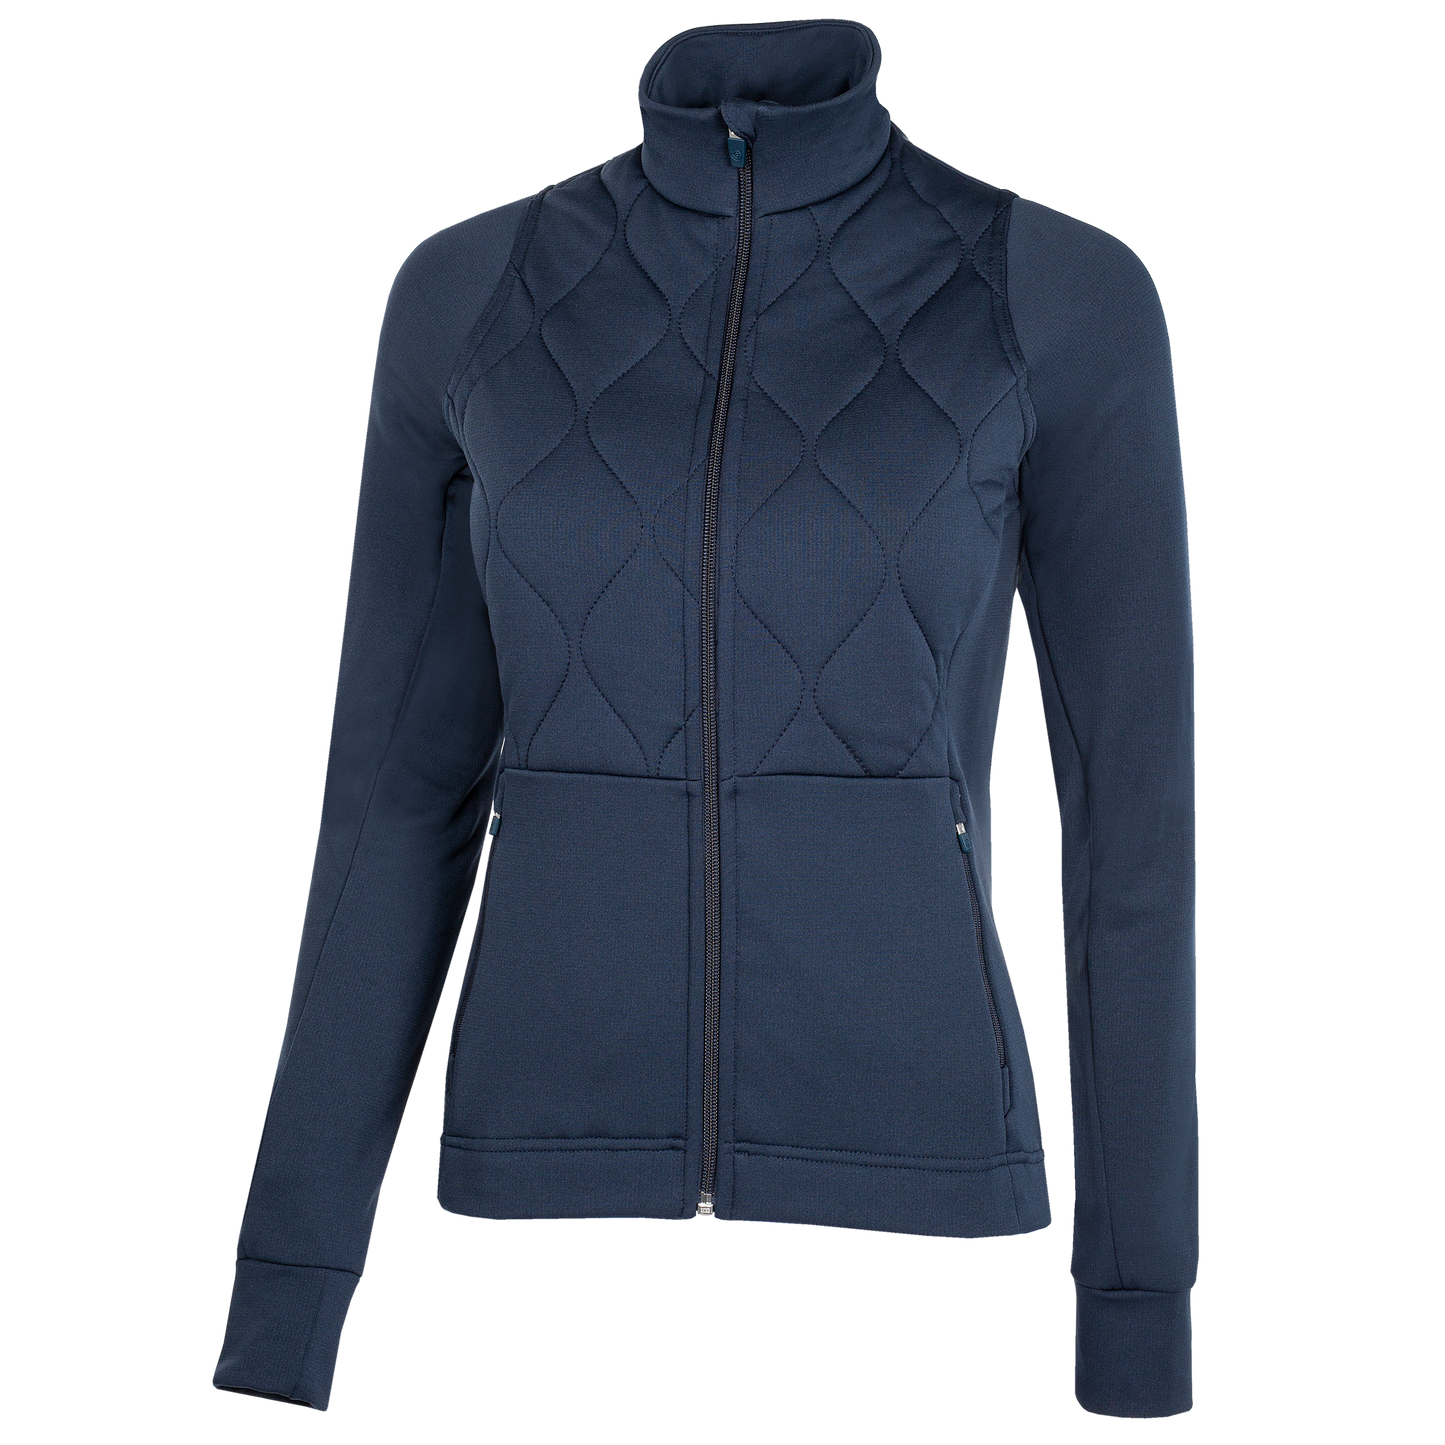 Galvin Green Ladies Insulating Mid-Layer Jacket In Navy